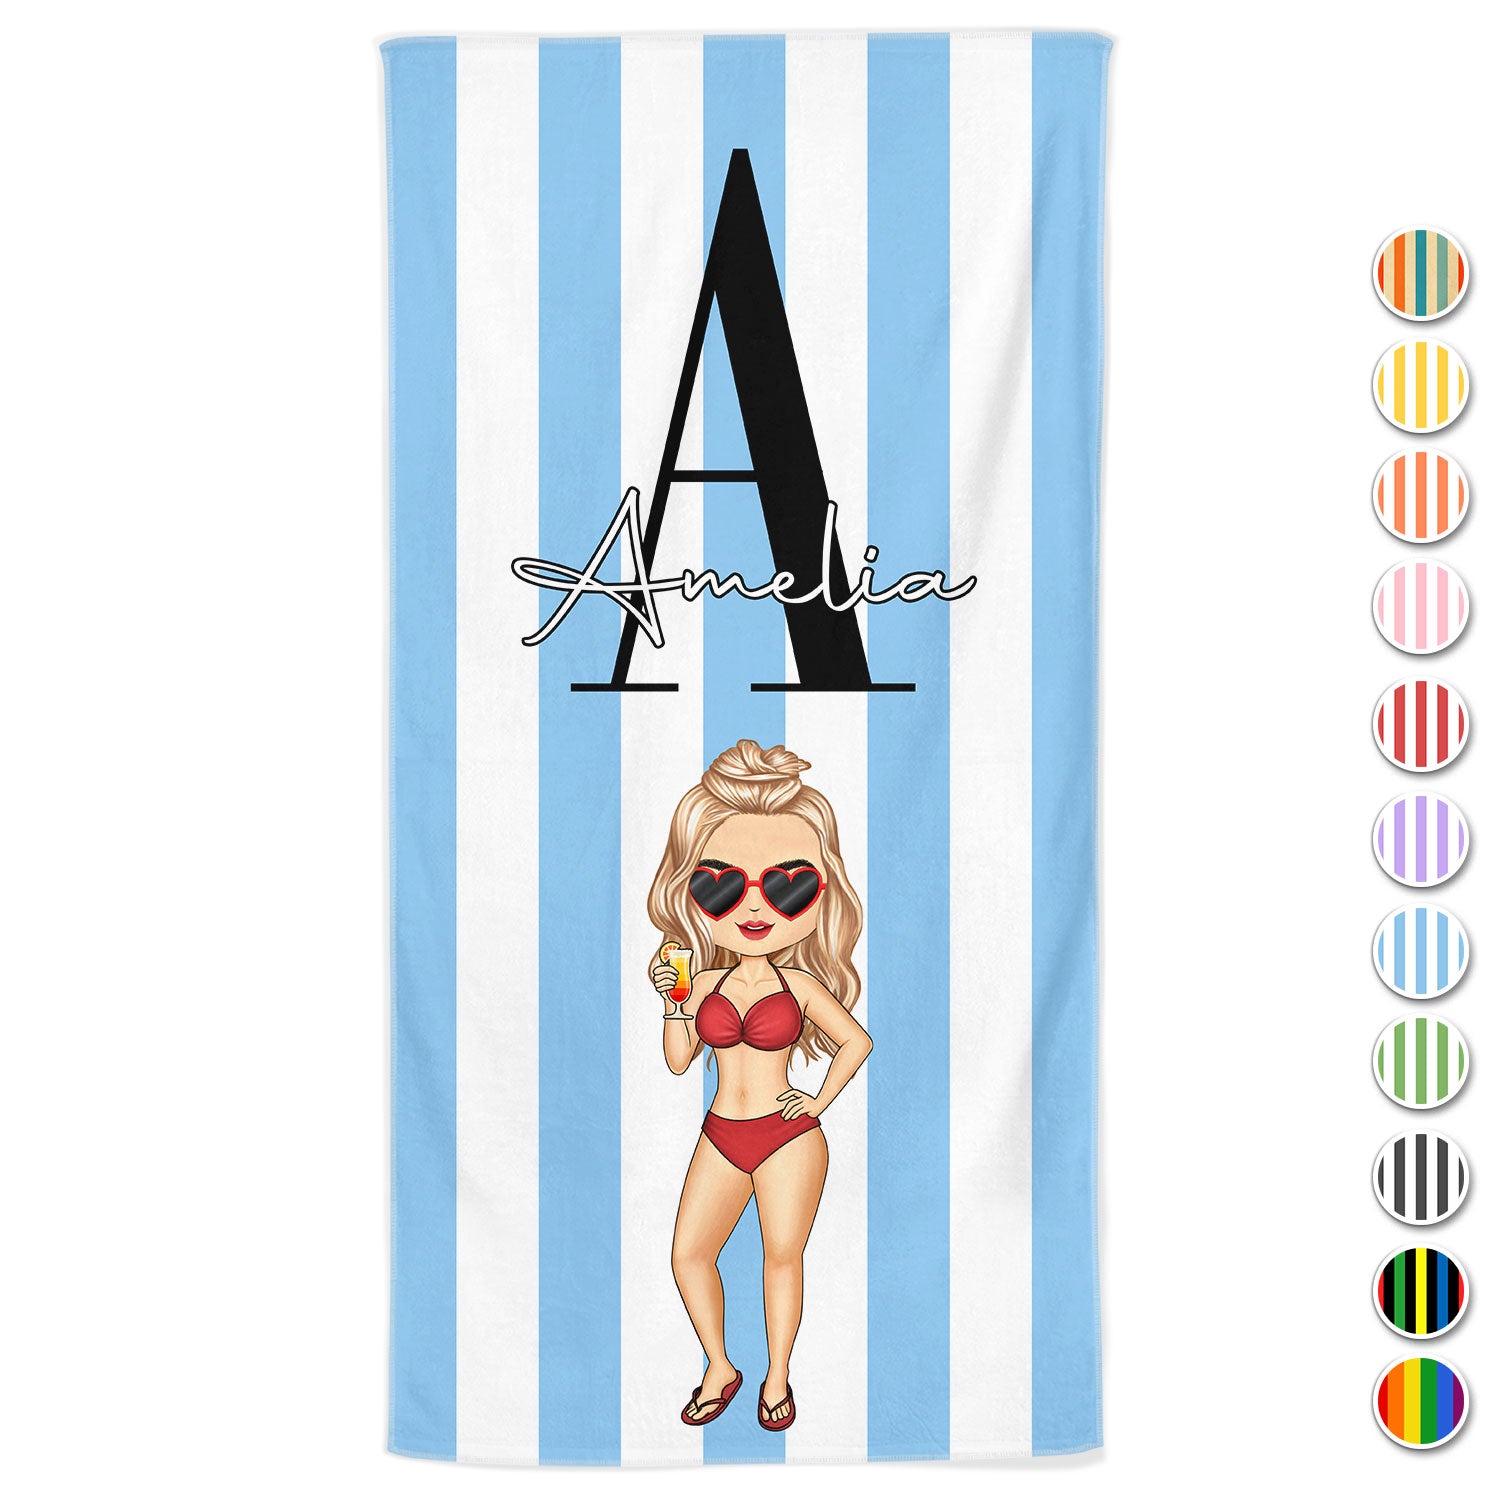 Chibi Alphabet Traveling Beach Poolside Swimming Picnic Vacation Corner - Birthday, Funny Gift For Her, Him, Besties, Family - Personalized Beach Towel